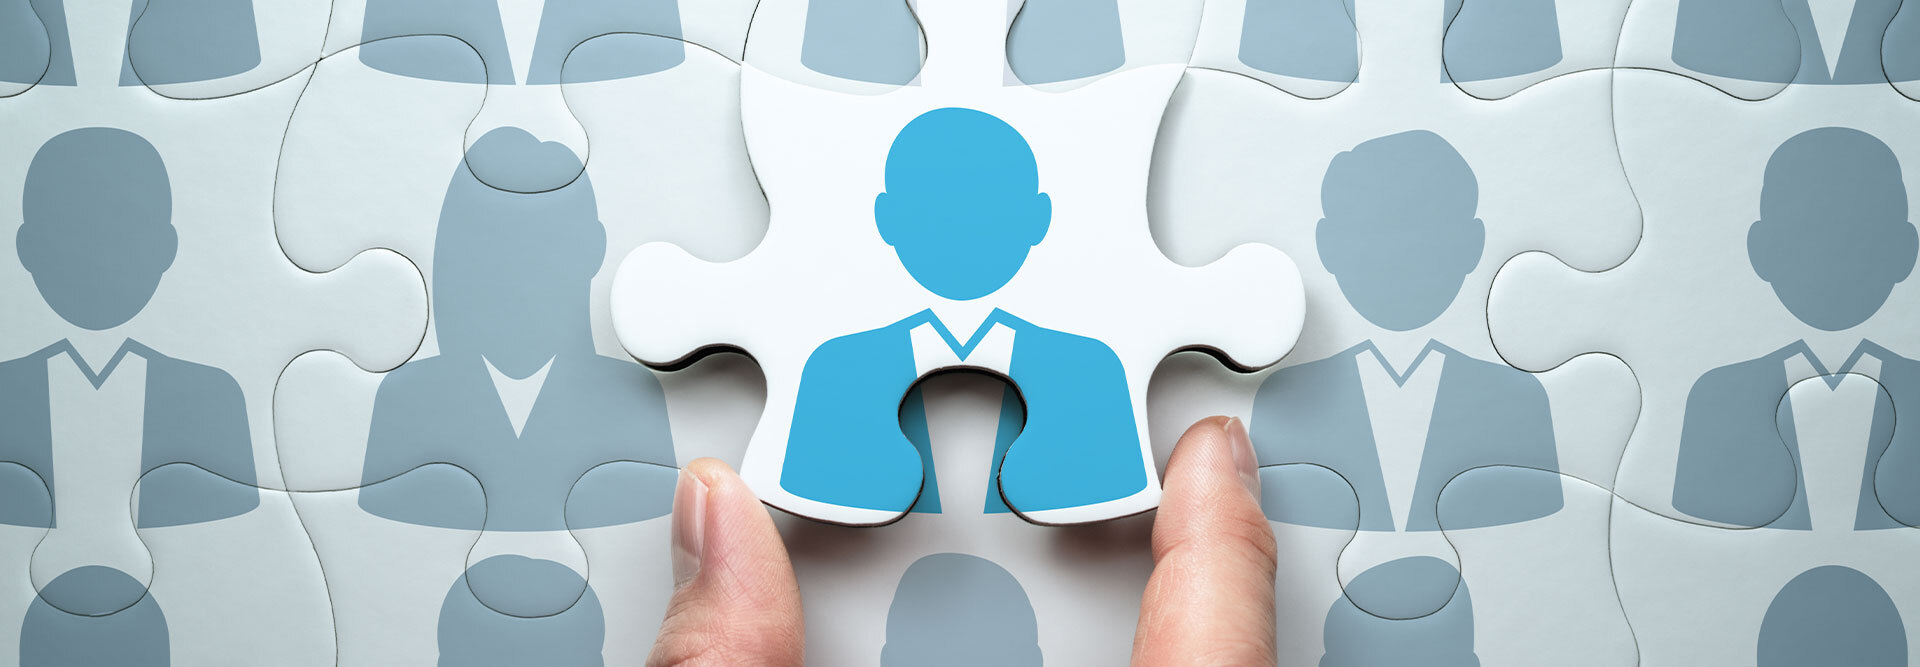 Agency owners hold a puzzle piece featuring a new client ready for marketing agency client onboarding to be added into the framework of the agency’s existing book of business